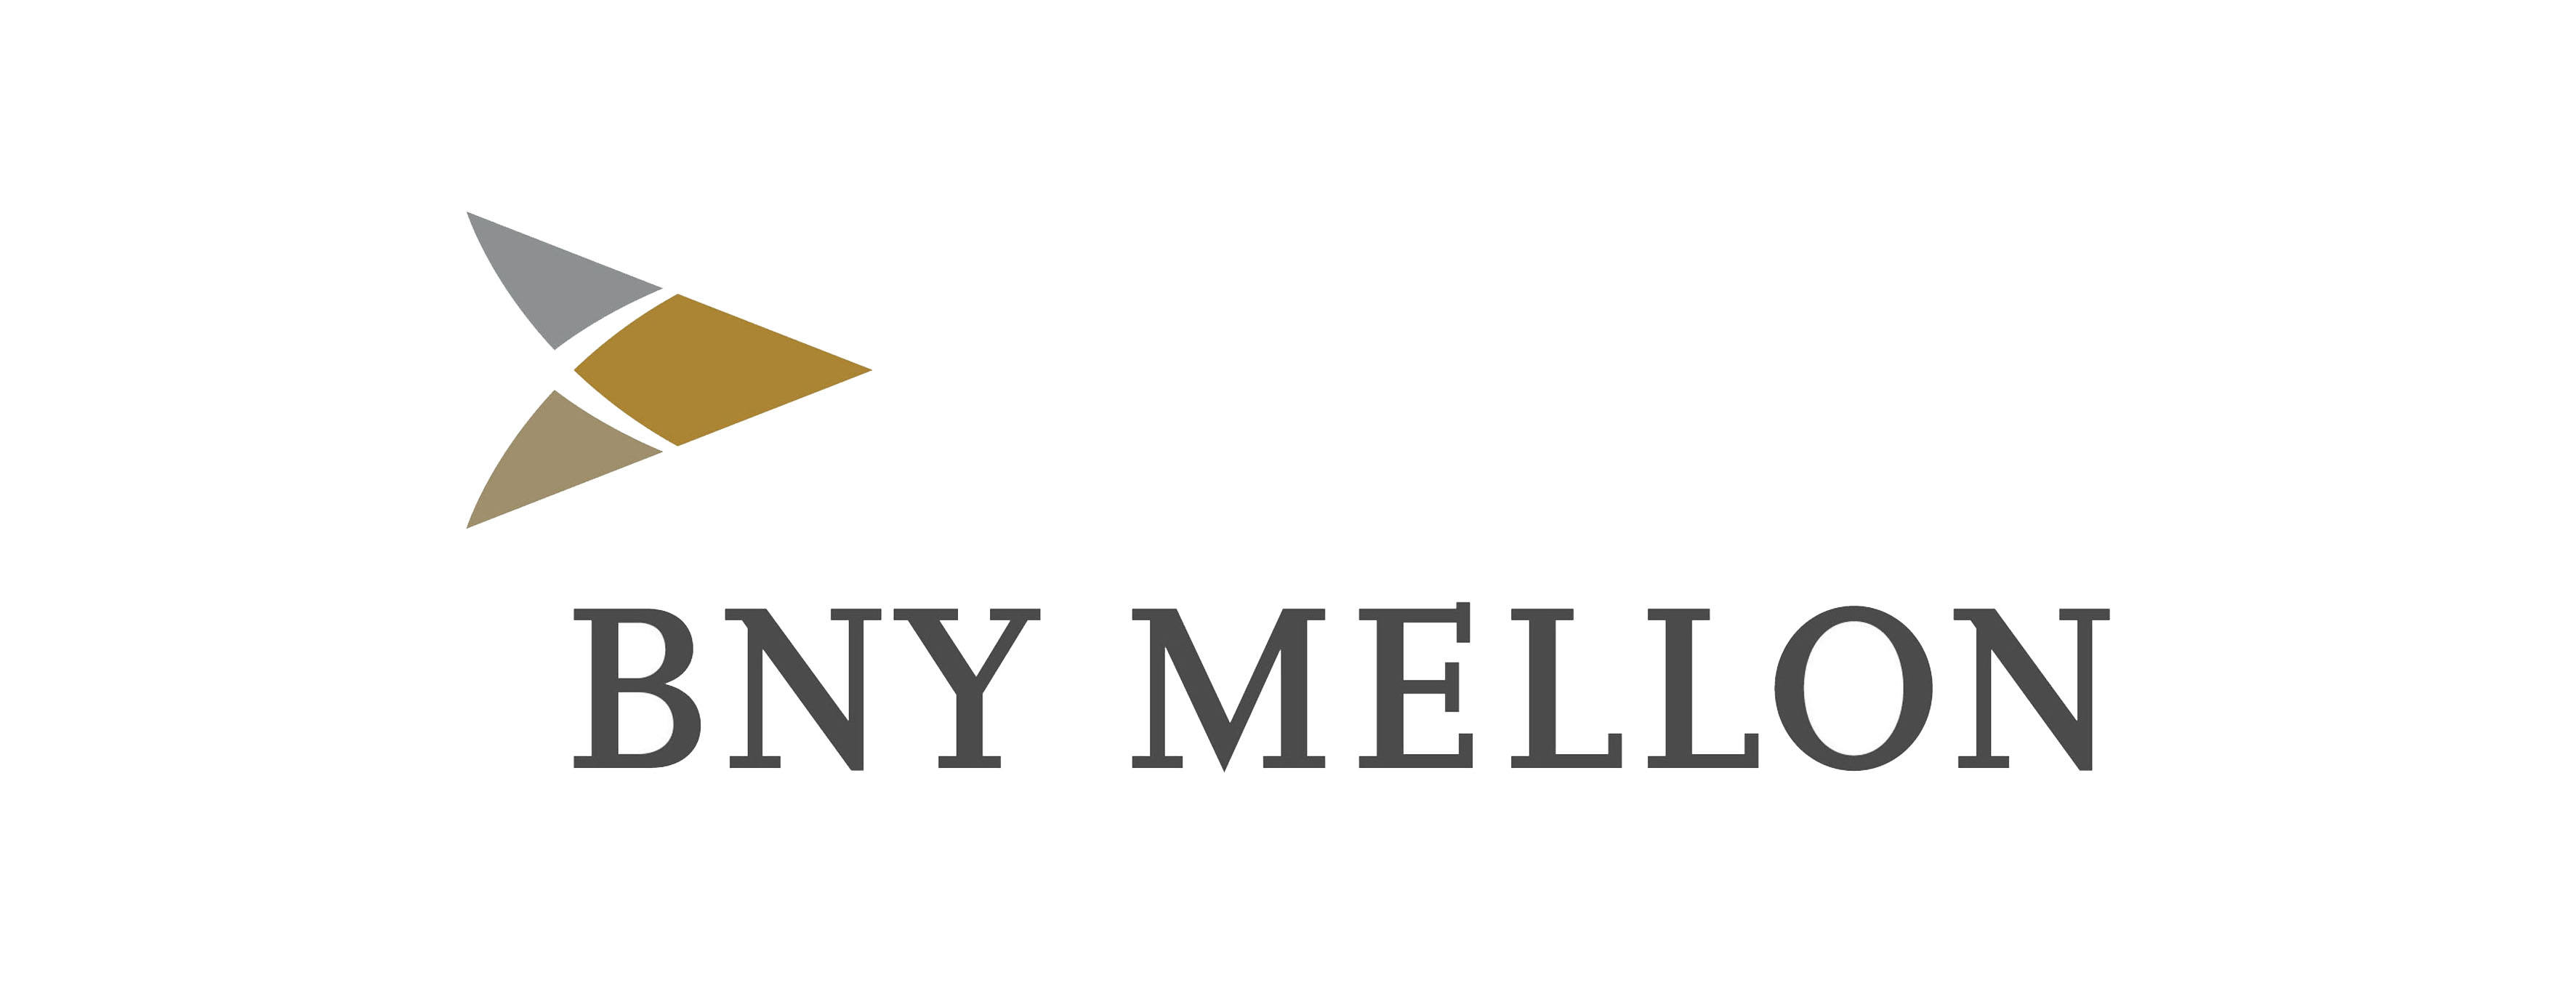 BNY Mellon Examines the Key Technologies and Initiatives Shaping the Future of Payments